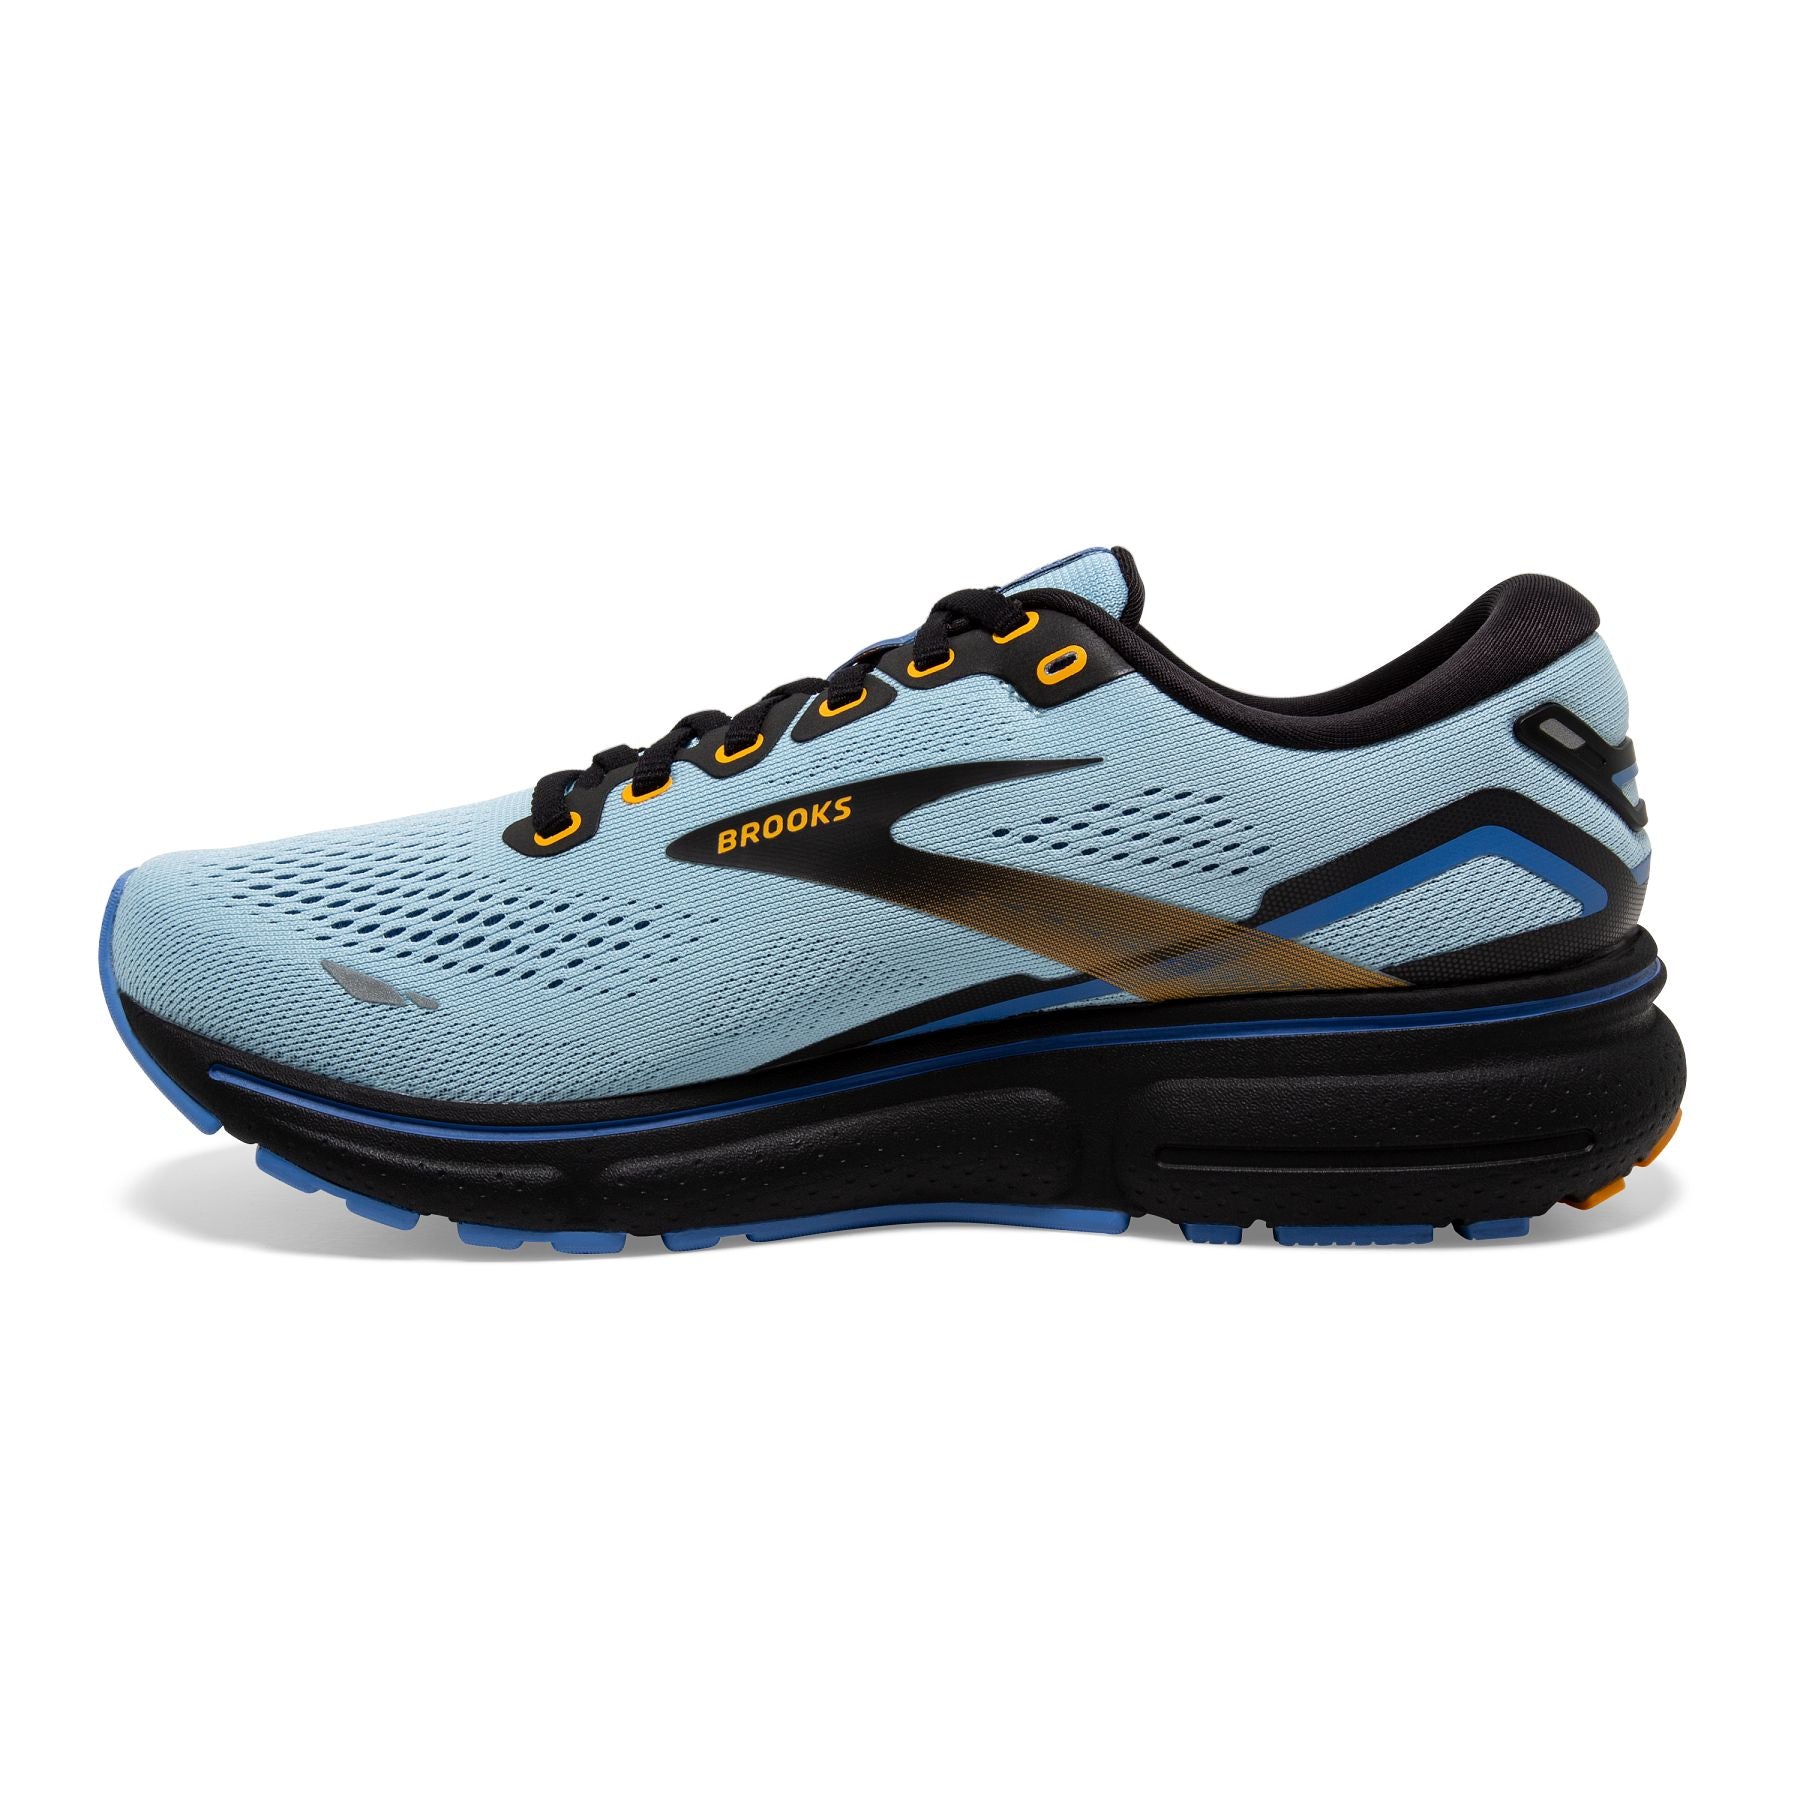 Medial view of the Women's Ghost 15 by Brooks in the color Light Blue/Black/Yellow